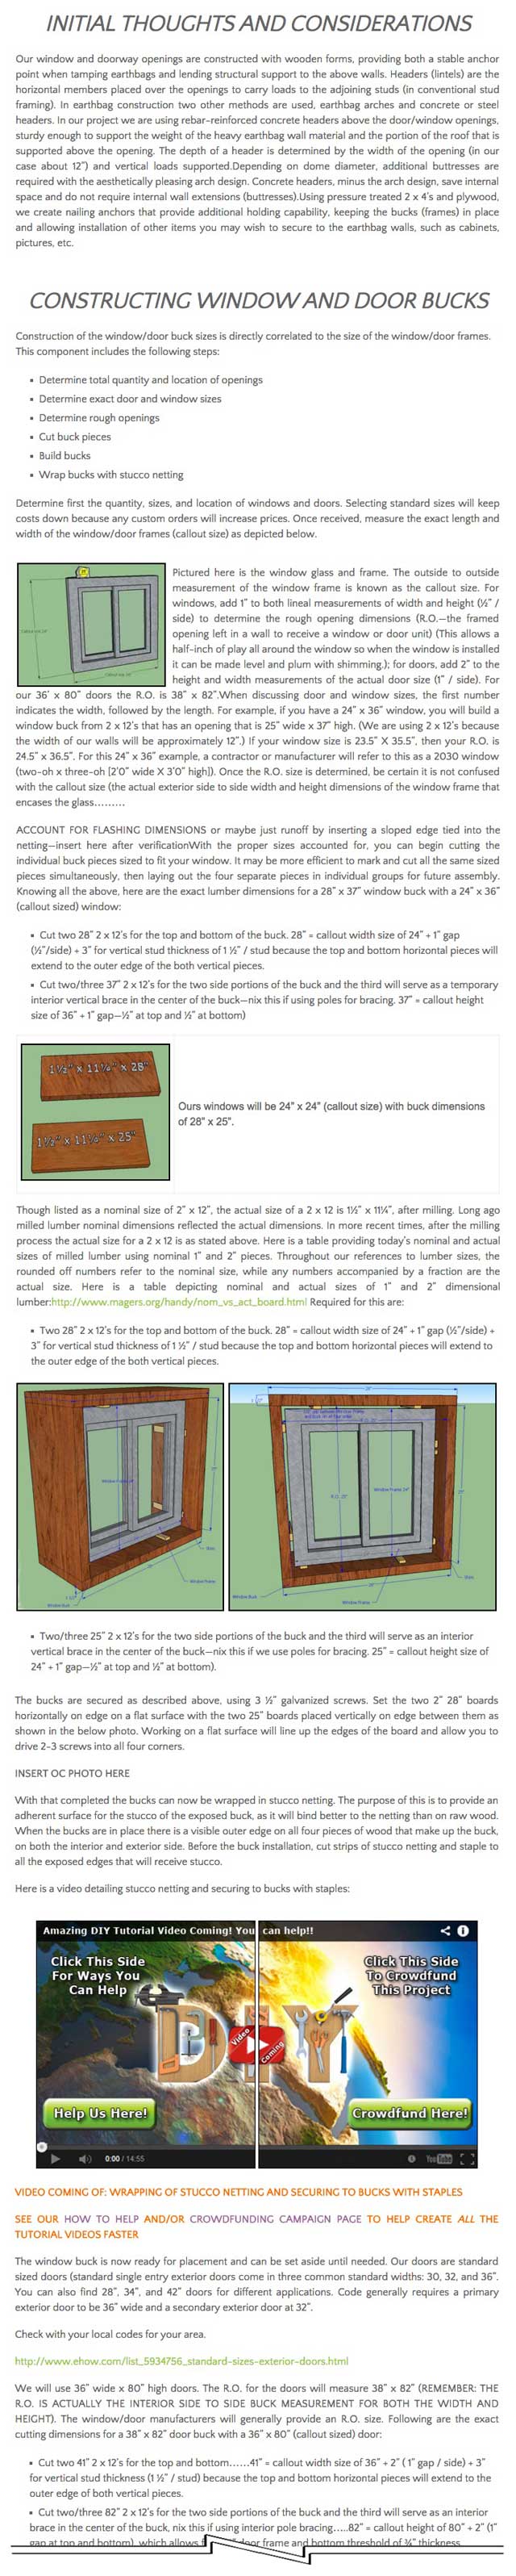 In addition to this, we began posting the website content for the dome home window and door framing tutorial for the upcoming crowdfunding campaign. What you see here is another 20% of this tutorial update bringing us to 35% done with this new page creation.